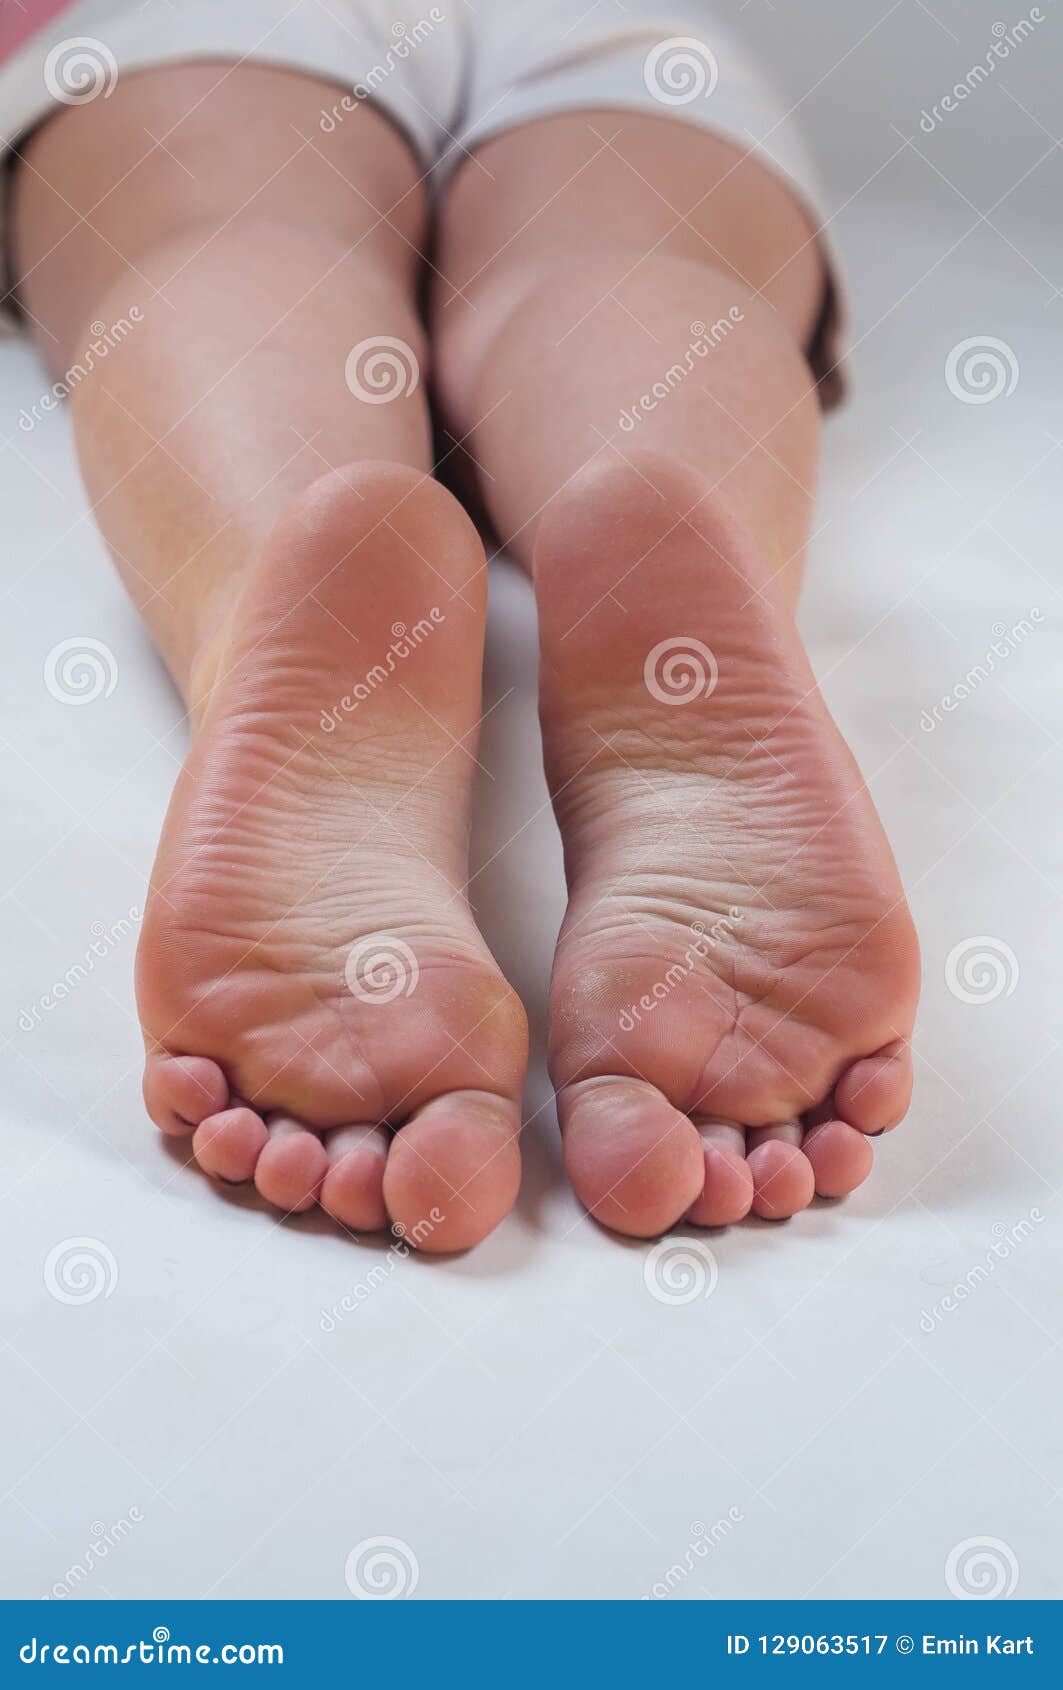 Cute young girl soles feet stock image 